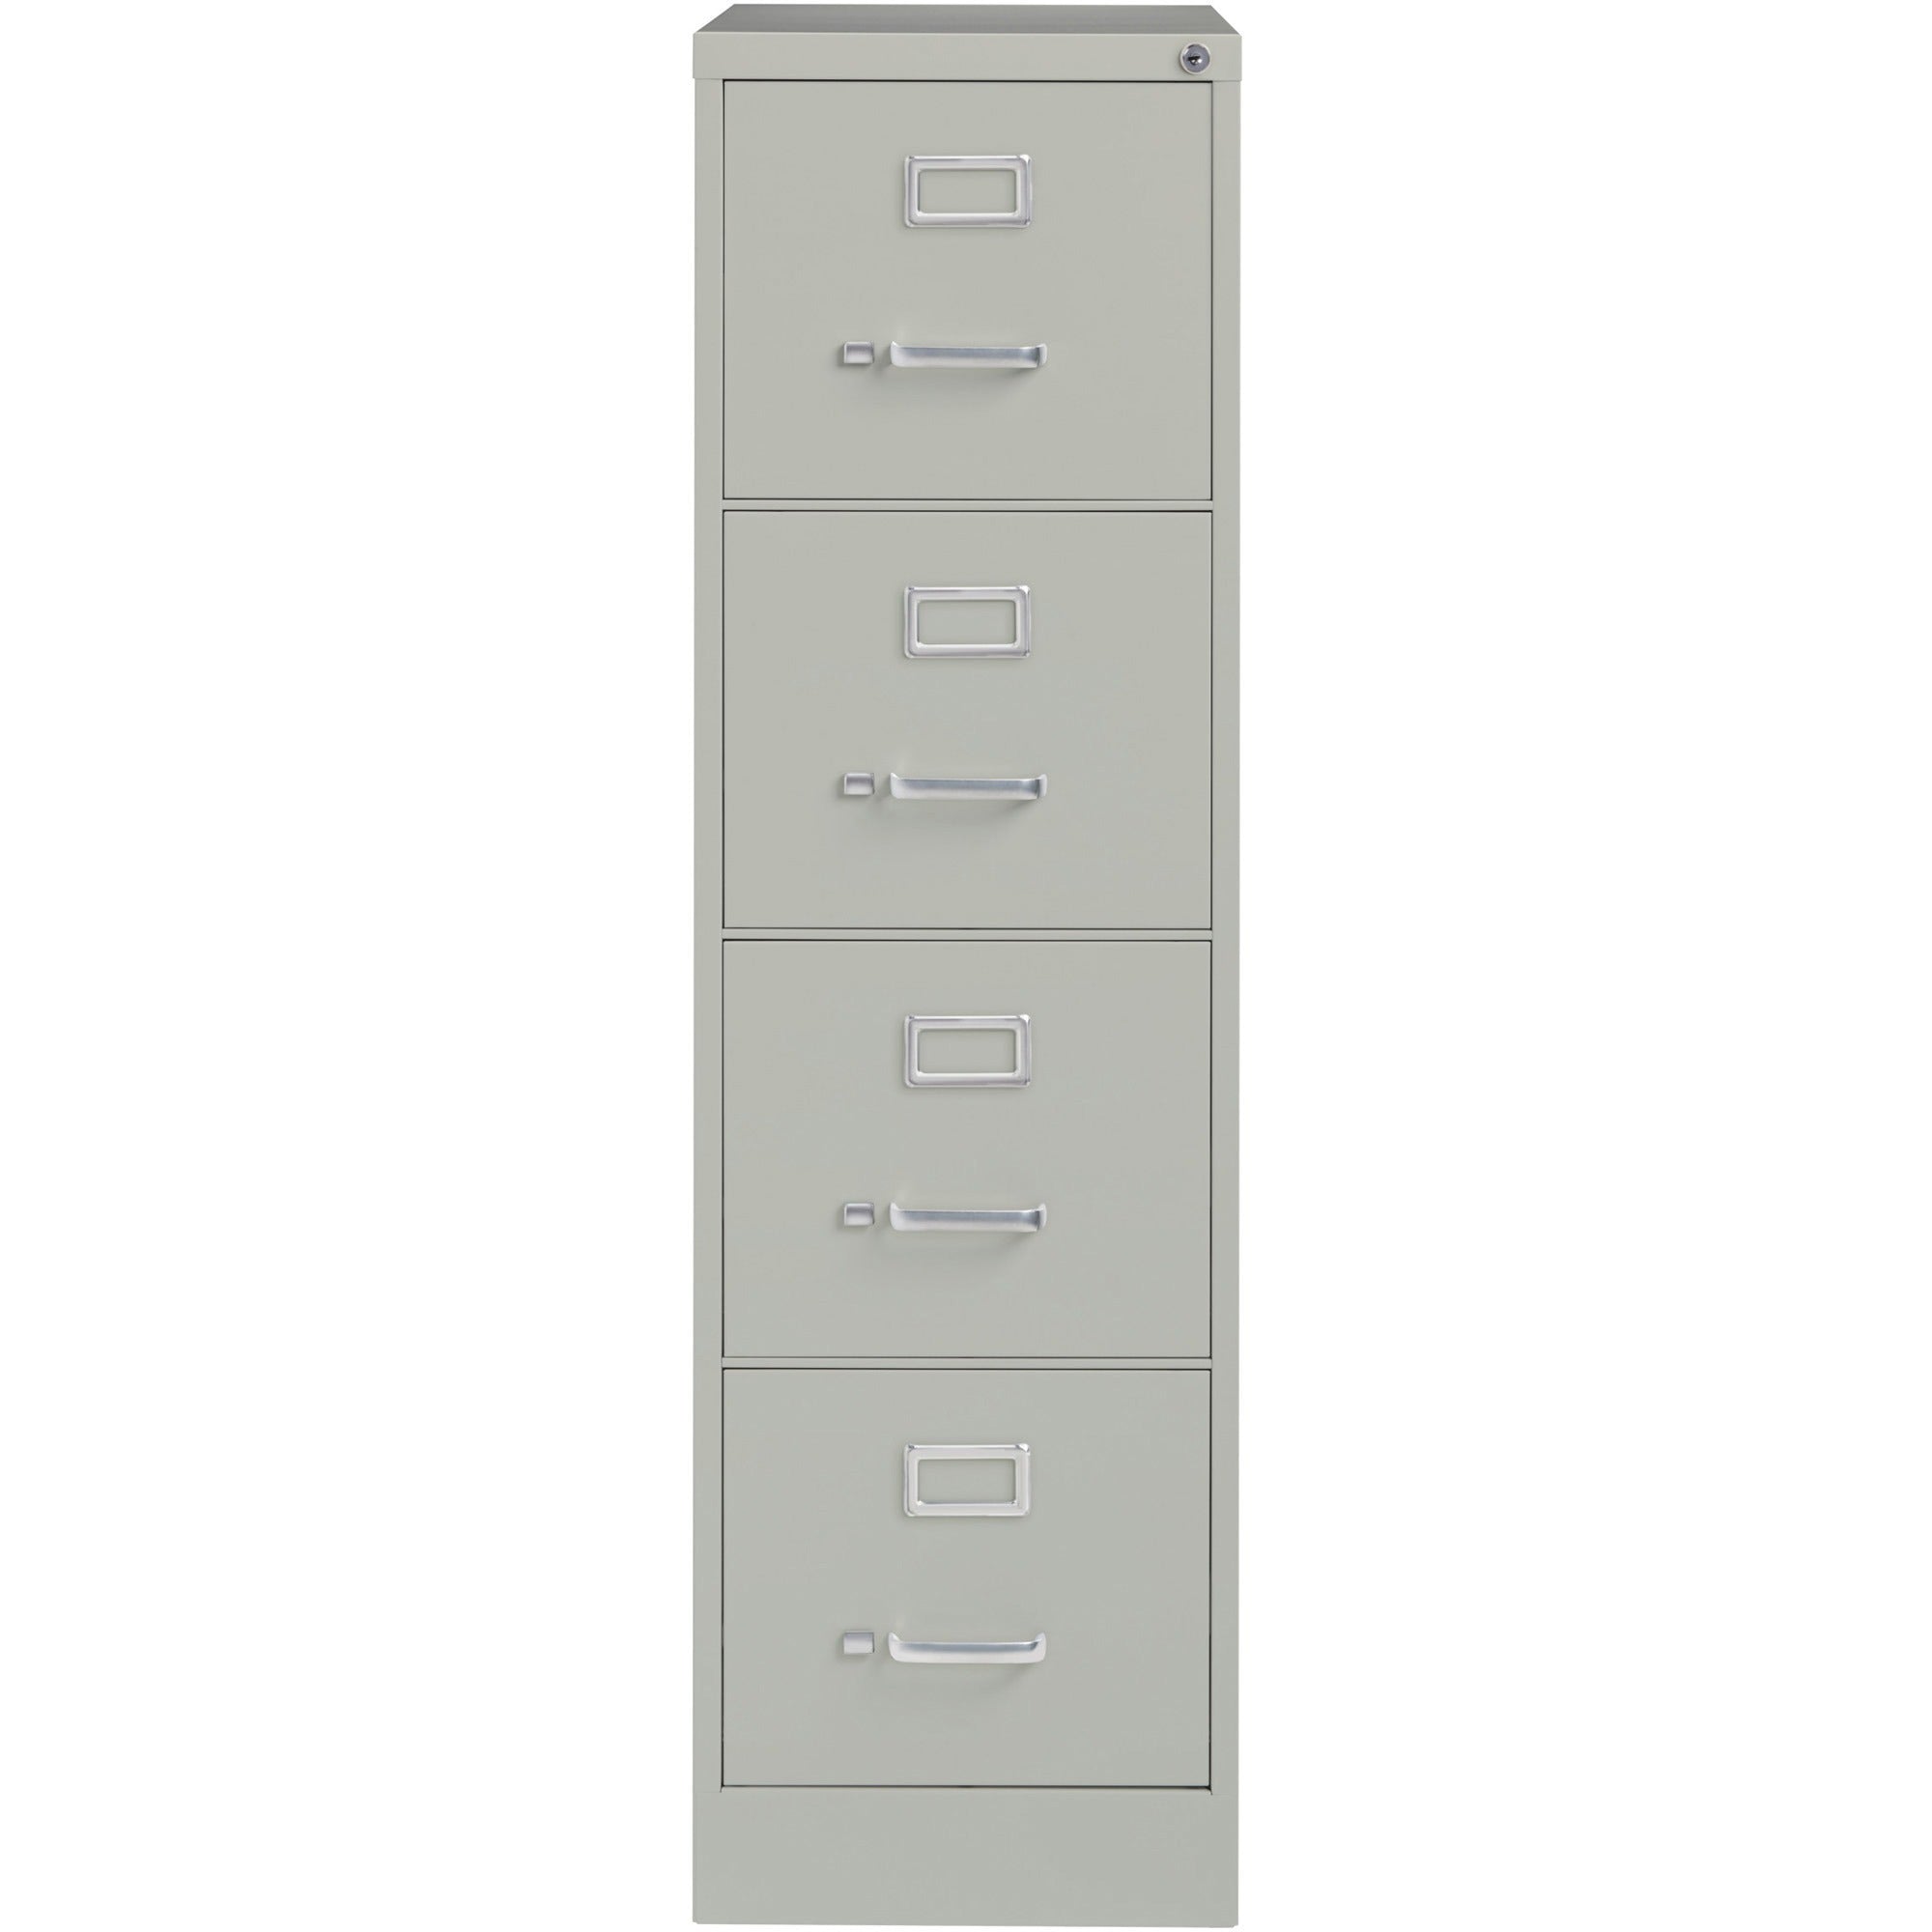 Lorell Fortress Series 22" Commercial-Grade Vertical File Cabinet - 15" x 22" x 52" - 4 x Drawer(s) for File - Letter - Lockable, Ball-bearing Suspension - Light Gray - Steel - Recycled - 